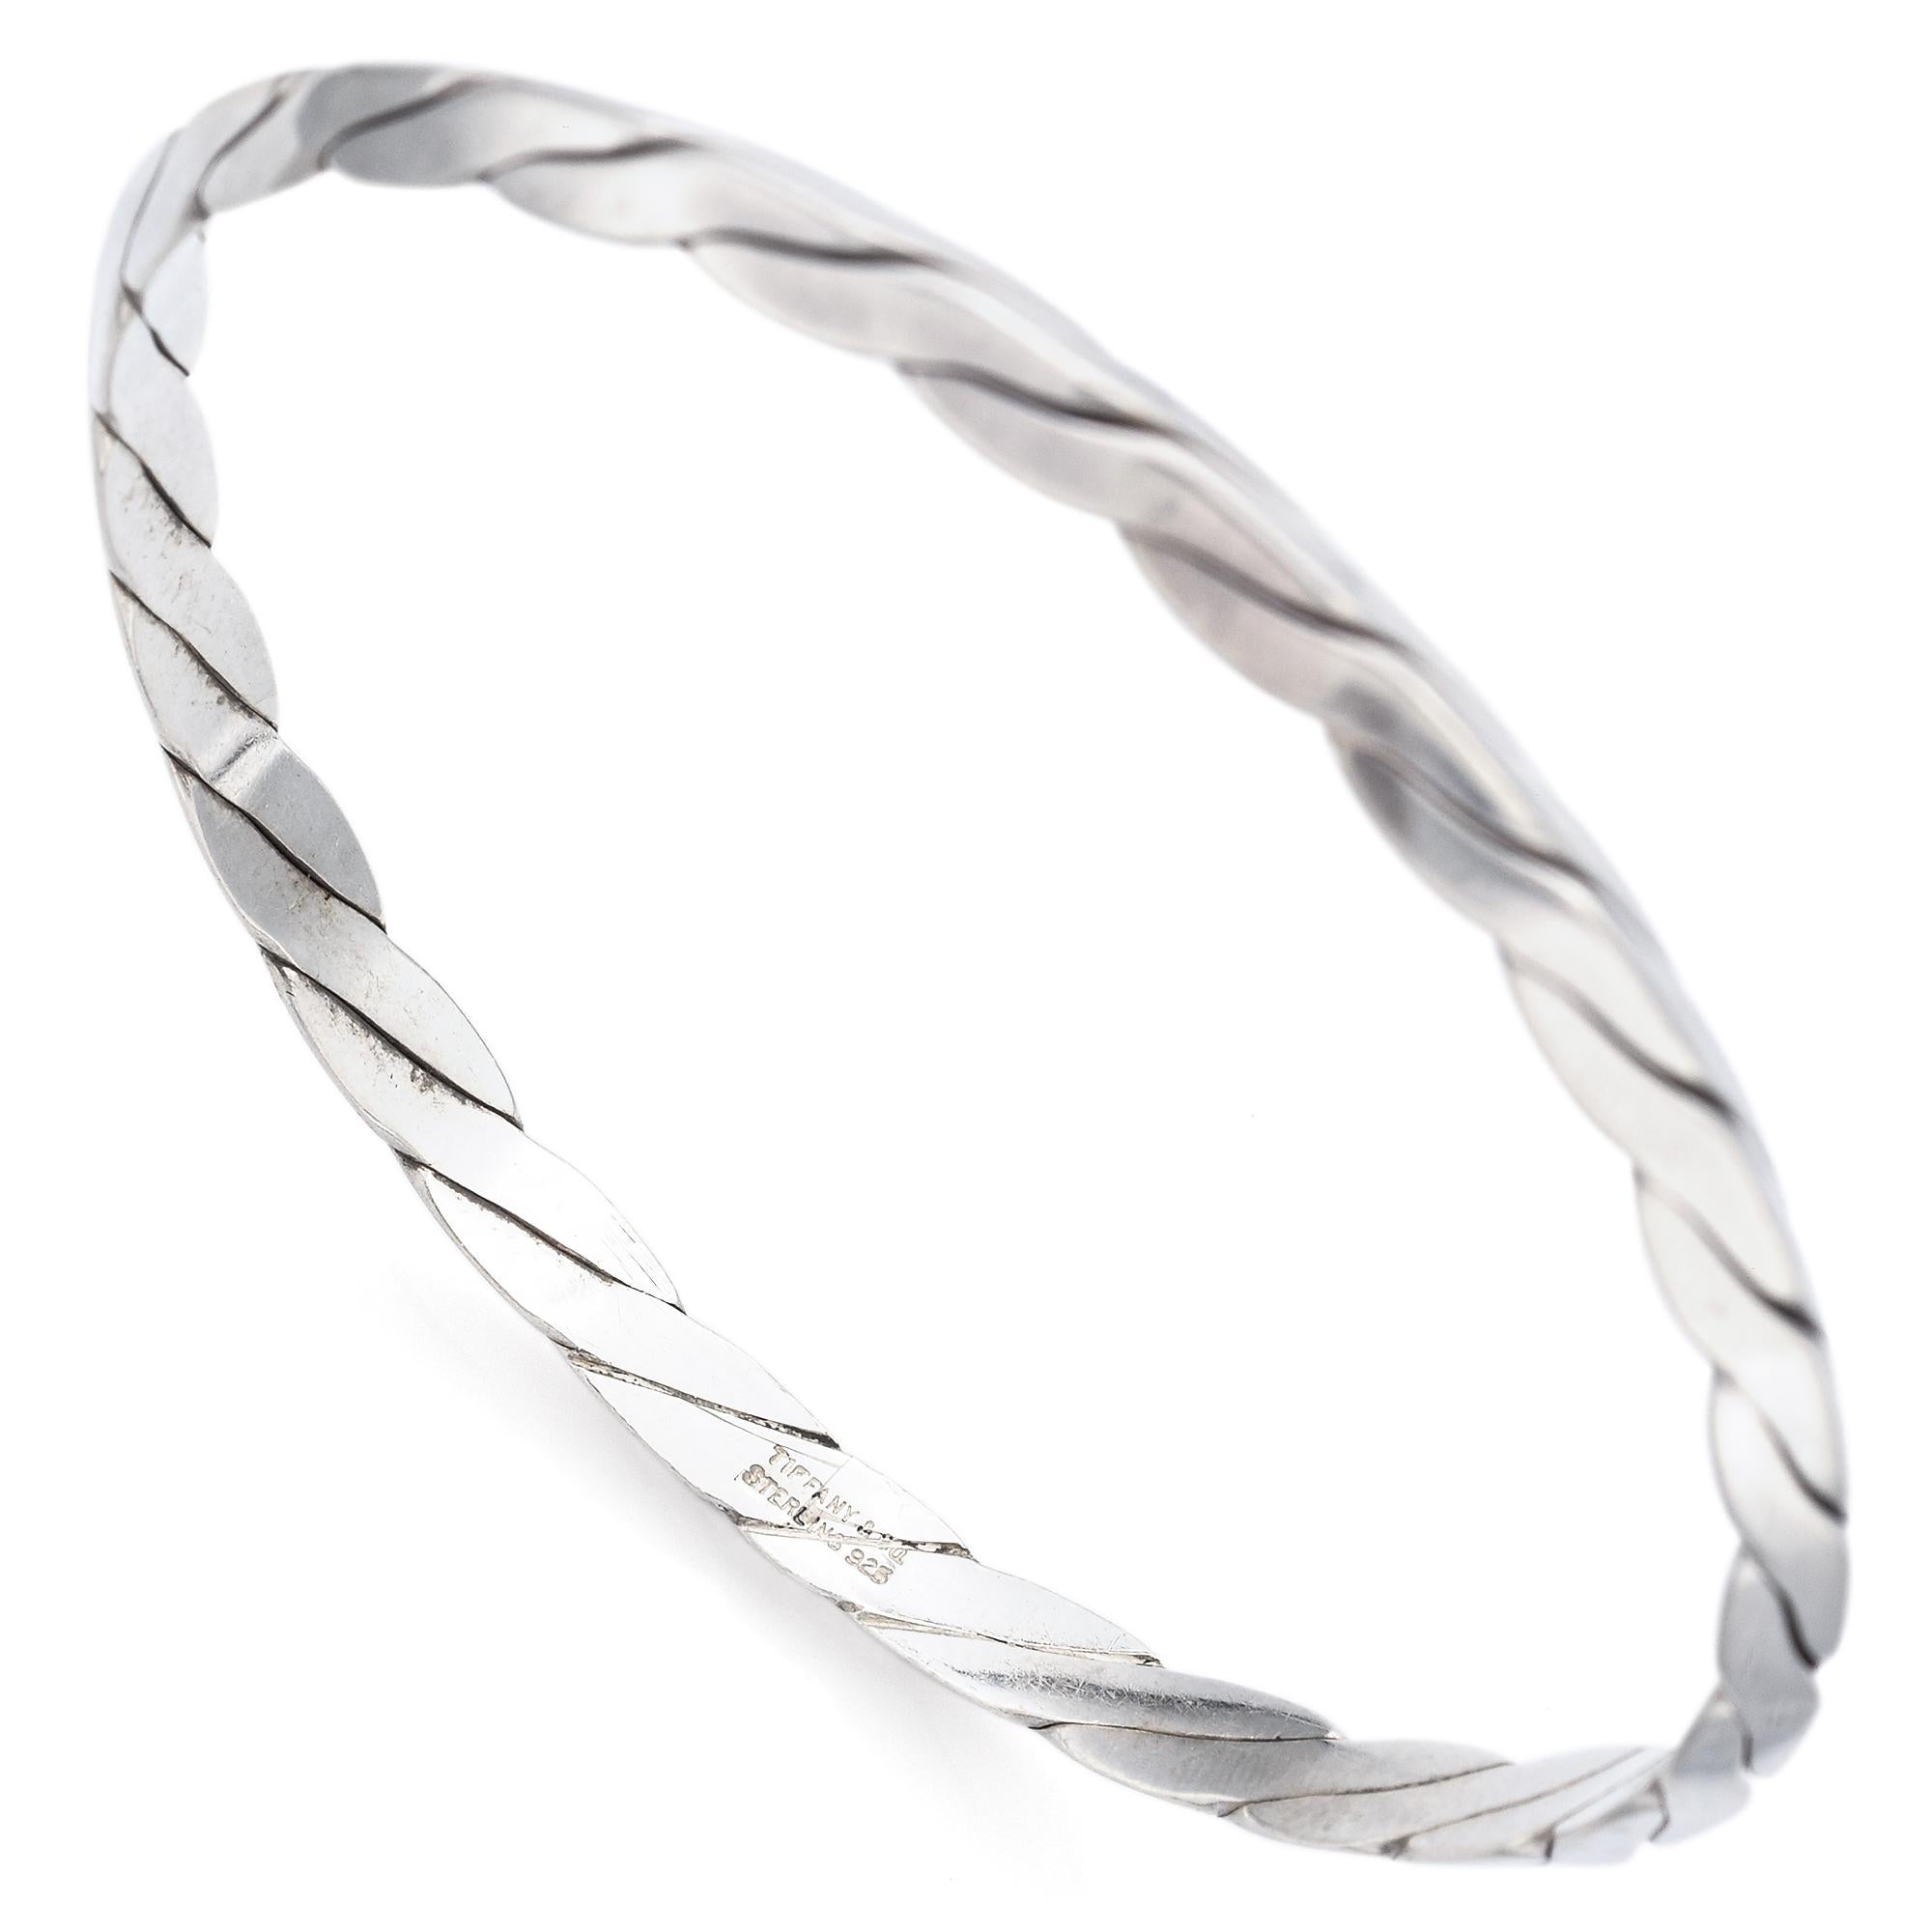 Weight: 17.3 Grams
Width: 5 mm 
Bracelet Size: 8 Inches
Hallmark: Tiffany & Co. Sterling 925

ITEM #:  BR-1056-092123-20